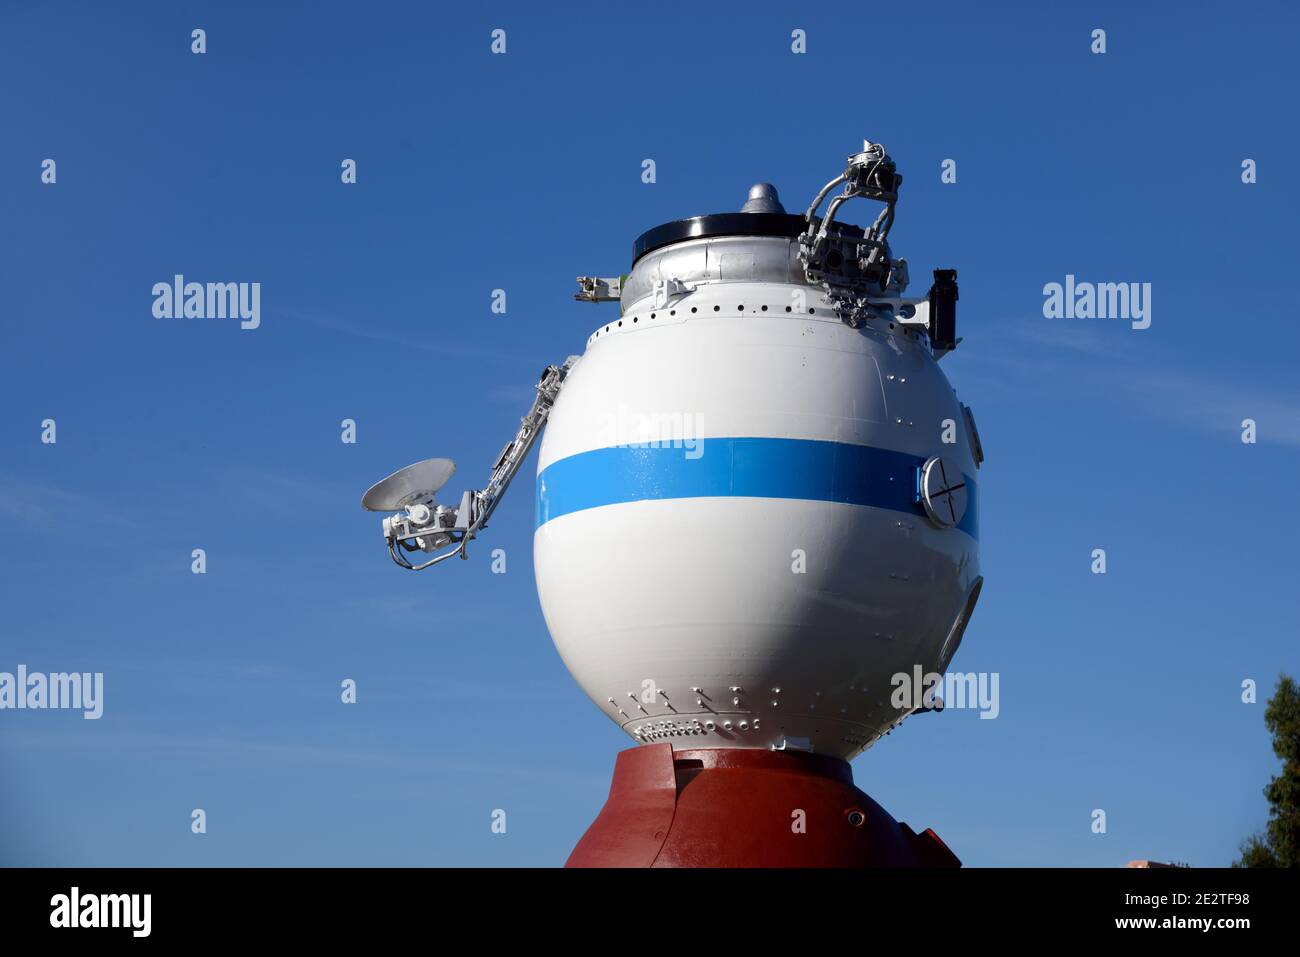 Full-Scale Model or reproduction of Sovier and Russian Soyuz Spacecraft at the Cité de l'Espace Space or Spaceflight Theme Park Toulouse France Stock Photo